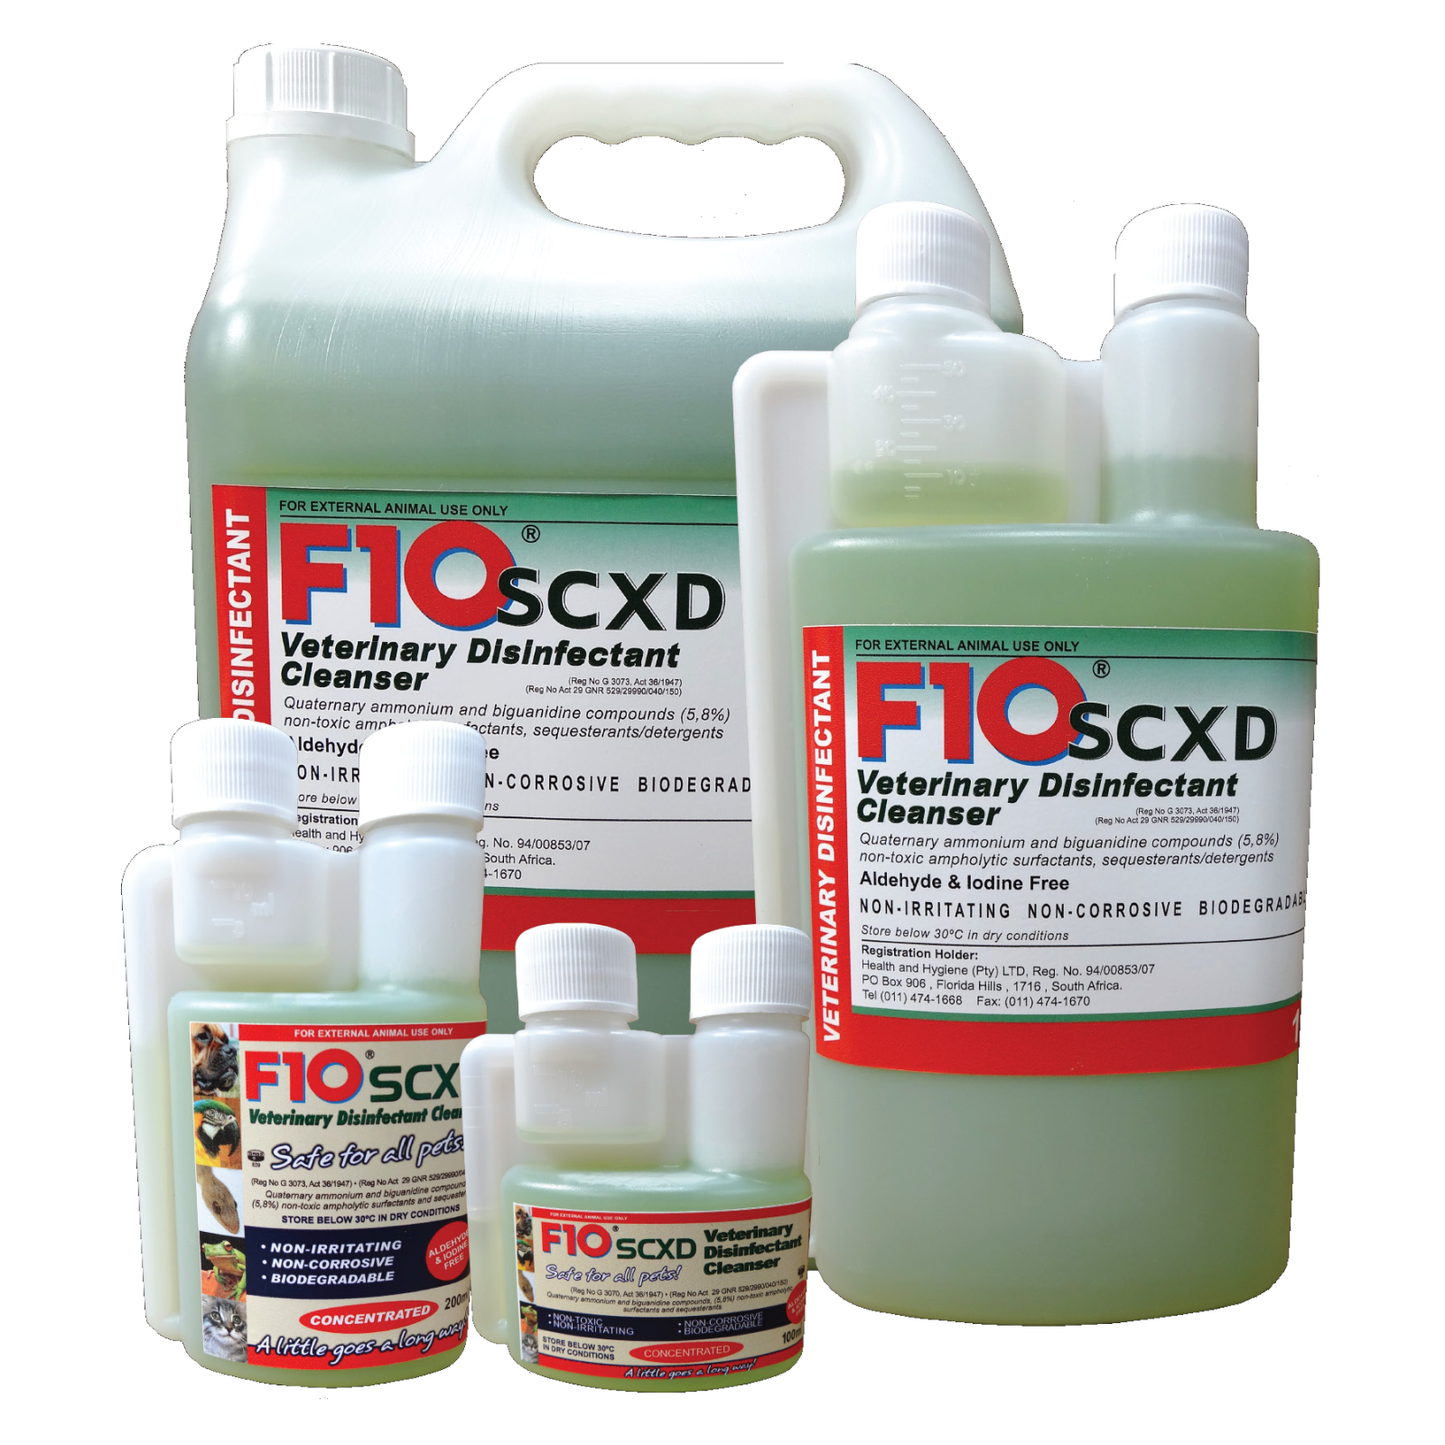 The four different sizes of F10SCXD Veterinary Disinfectant Cleanser - 100ml, 200ml, 1 litre and 5 litre bottles